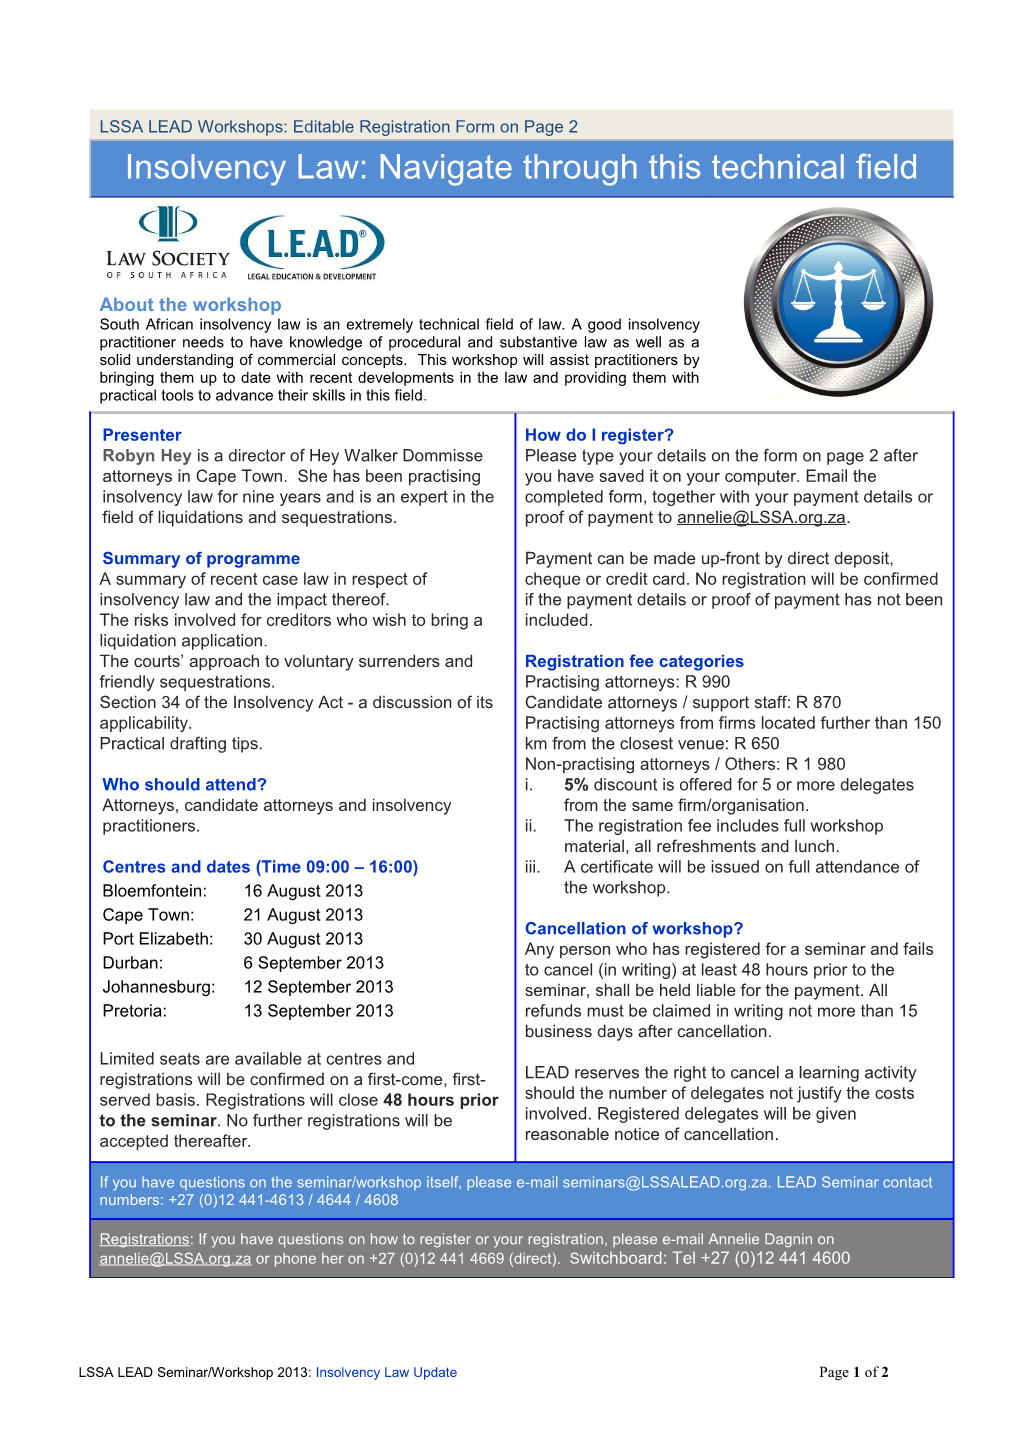 LSSA LEAD SEMINARS 2013: : Insolvency Law Update Page 1 of 3